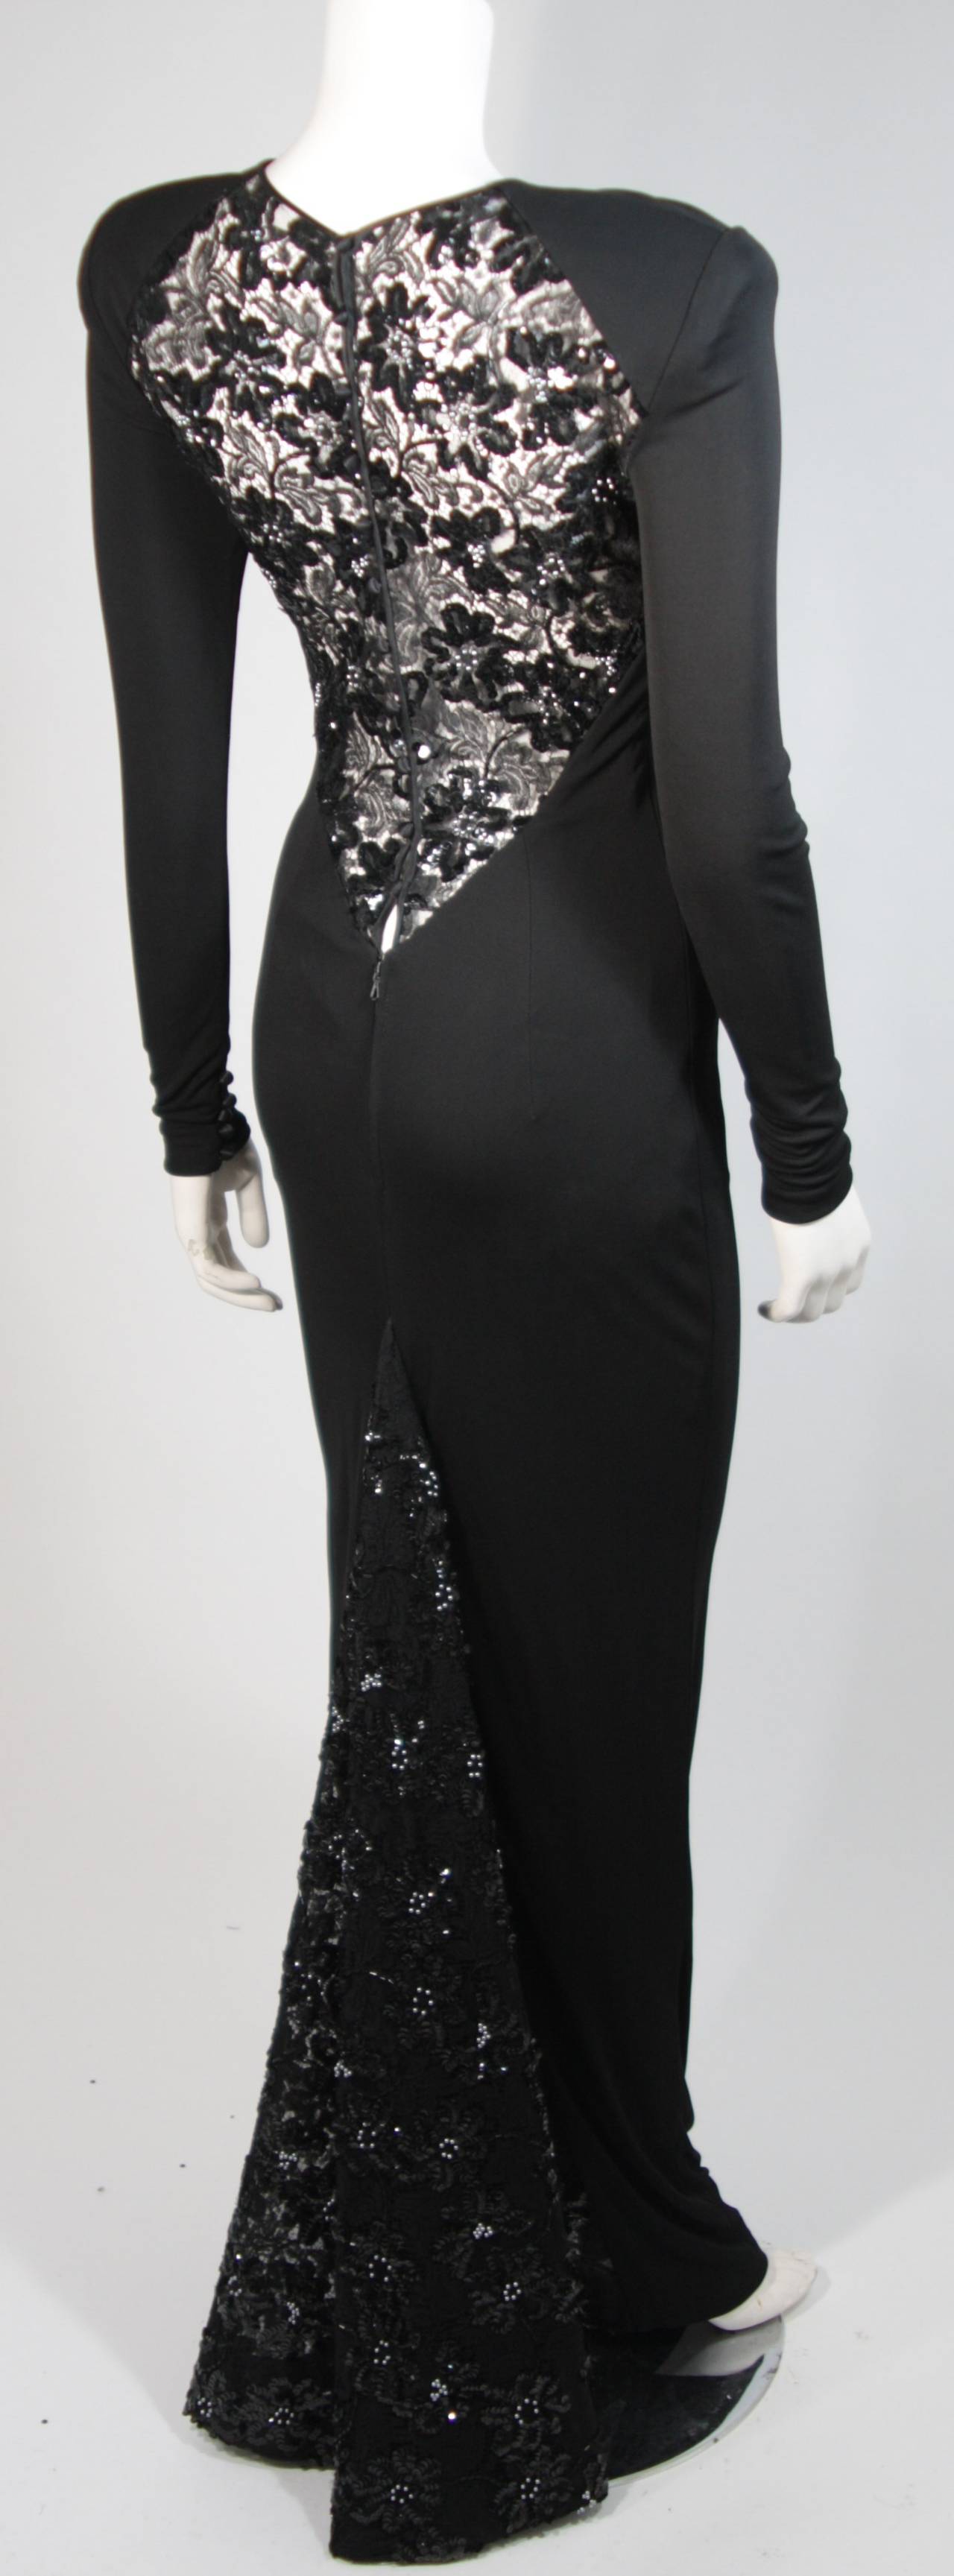 Vicky Tiel Black Jersey Gown with Sequin Lace Accents Size Small 3